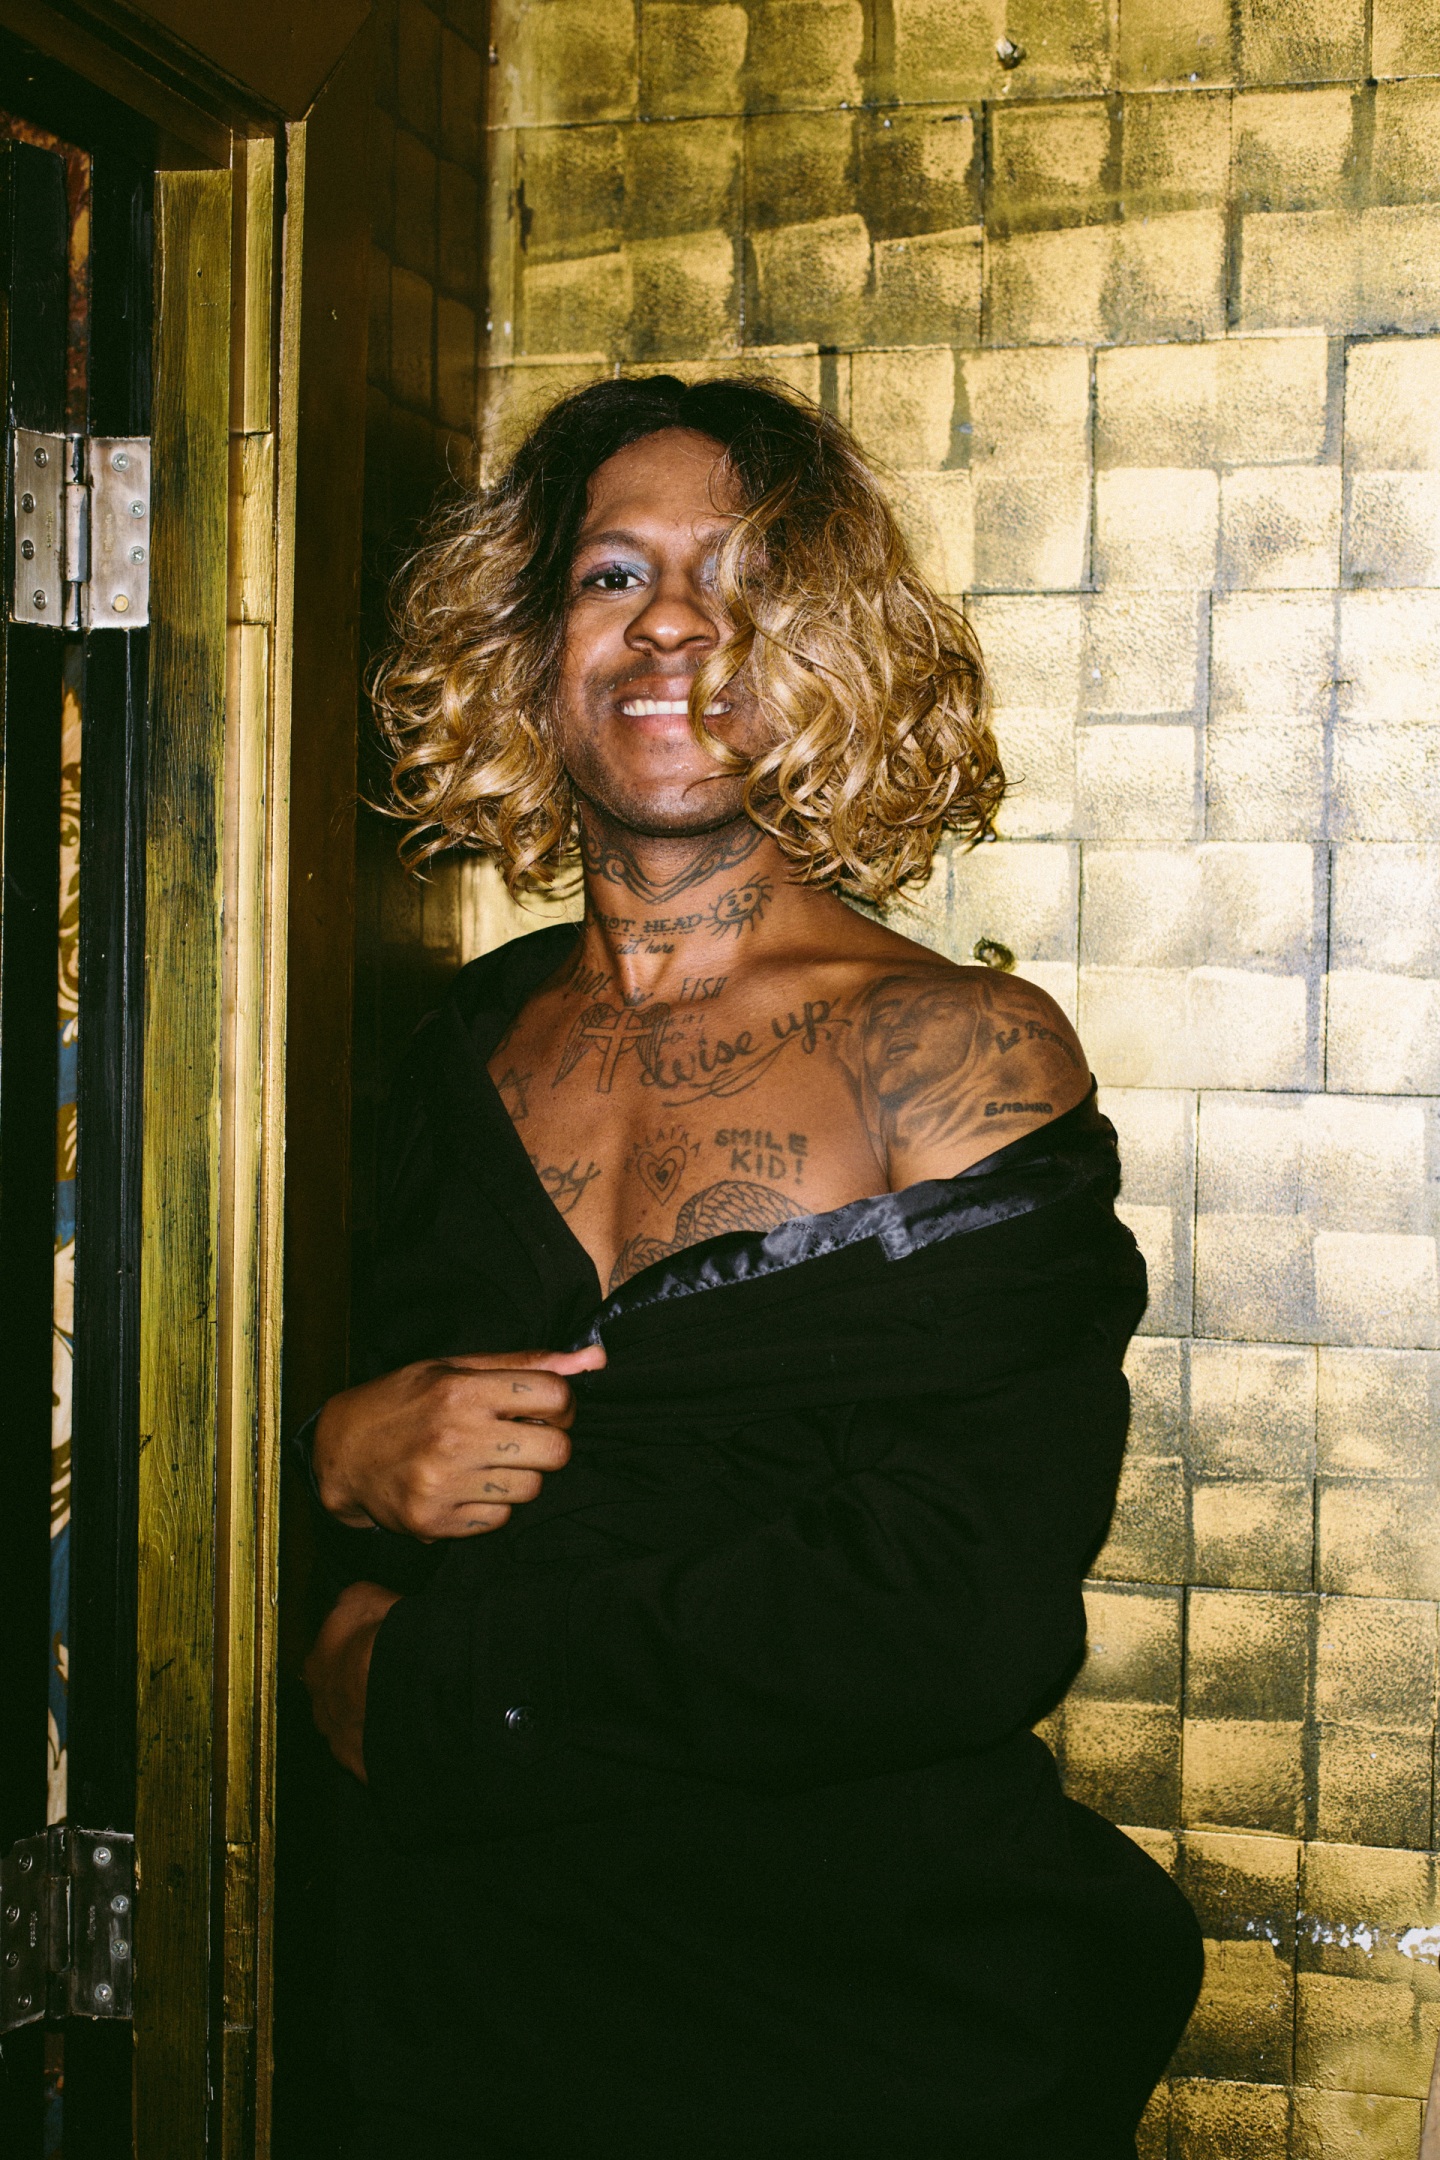 23 Outfits From Mykki Blanco Fans To Copy This Fall